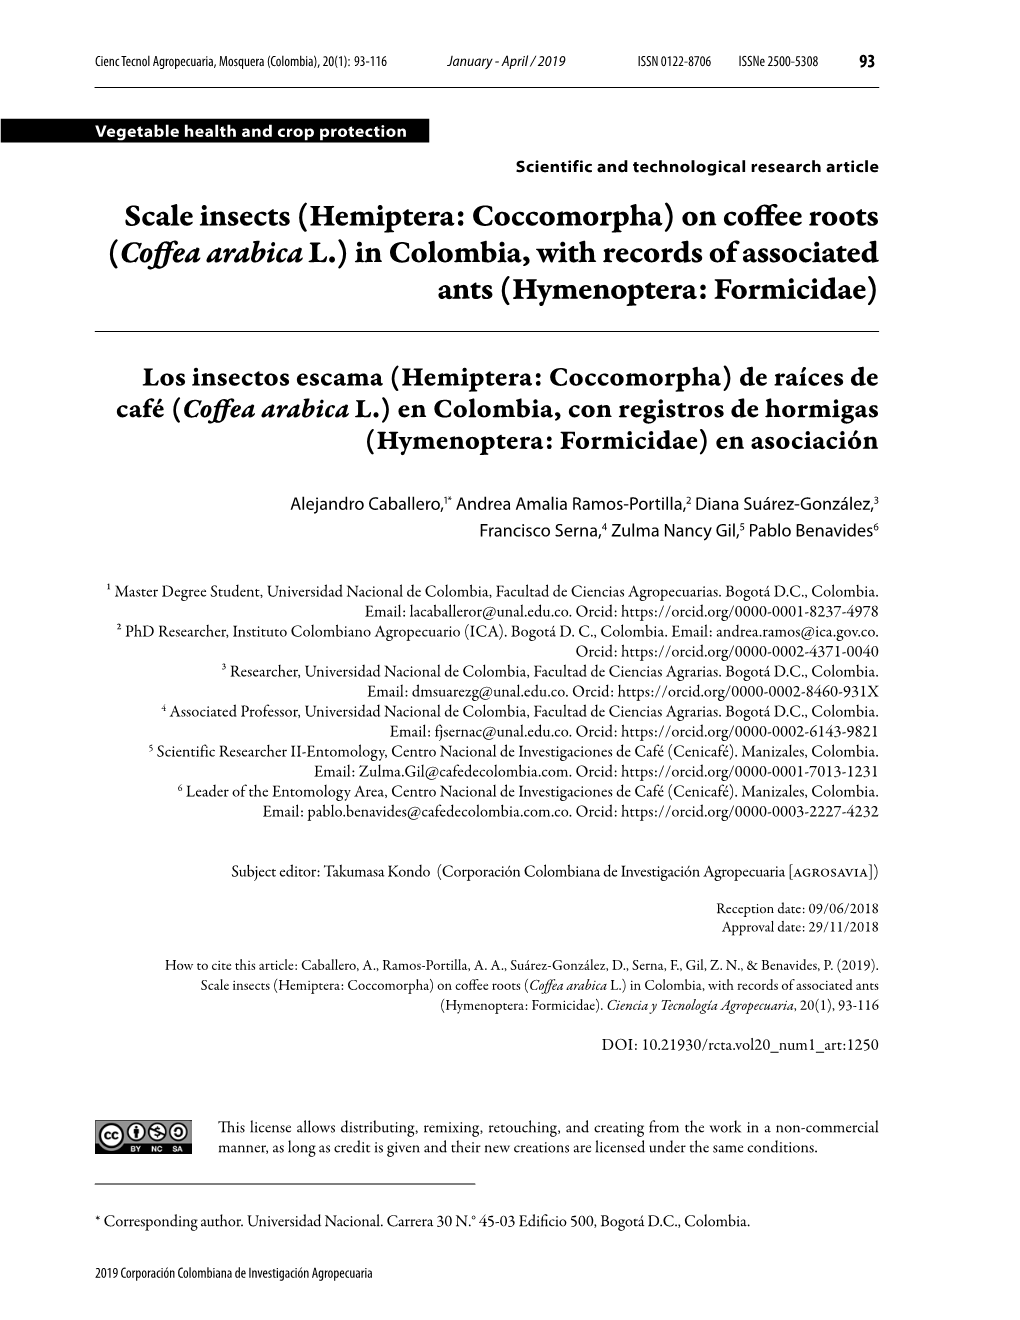 Scale Insects (Hemiptera: Coccomorpha) on Coffee Roots (Coffea Arabica L.) in Colombia, with Records of Associated Ants (Hymenoptera: Formicidae)